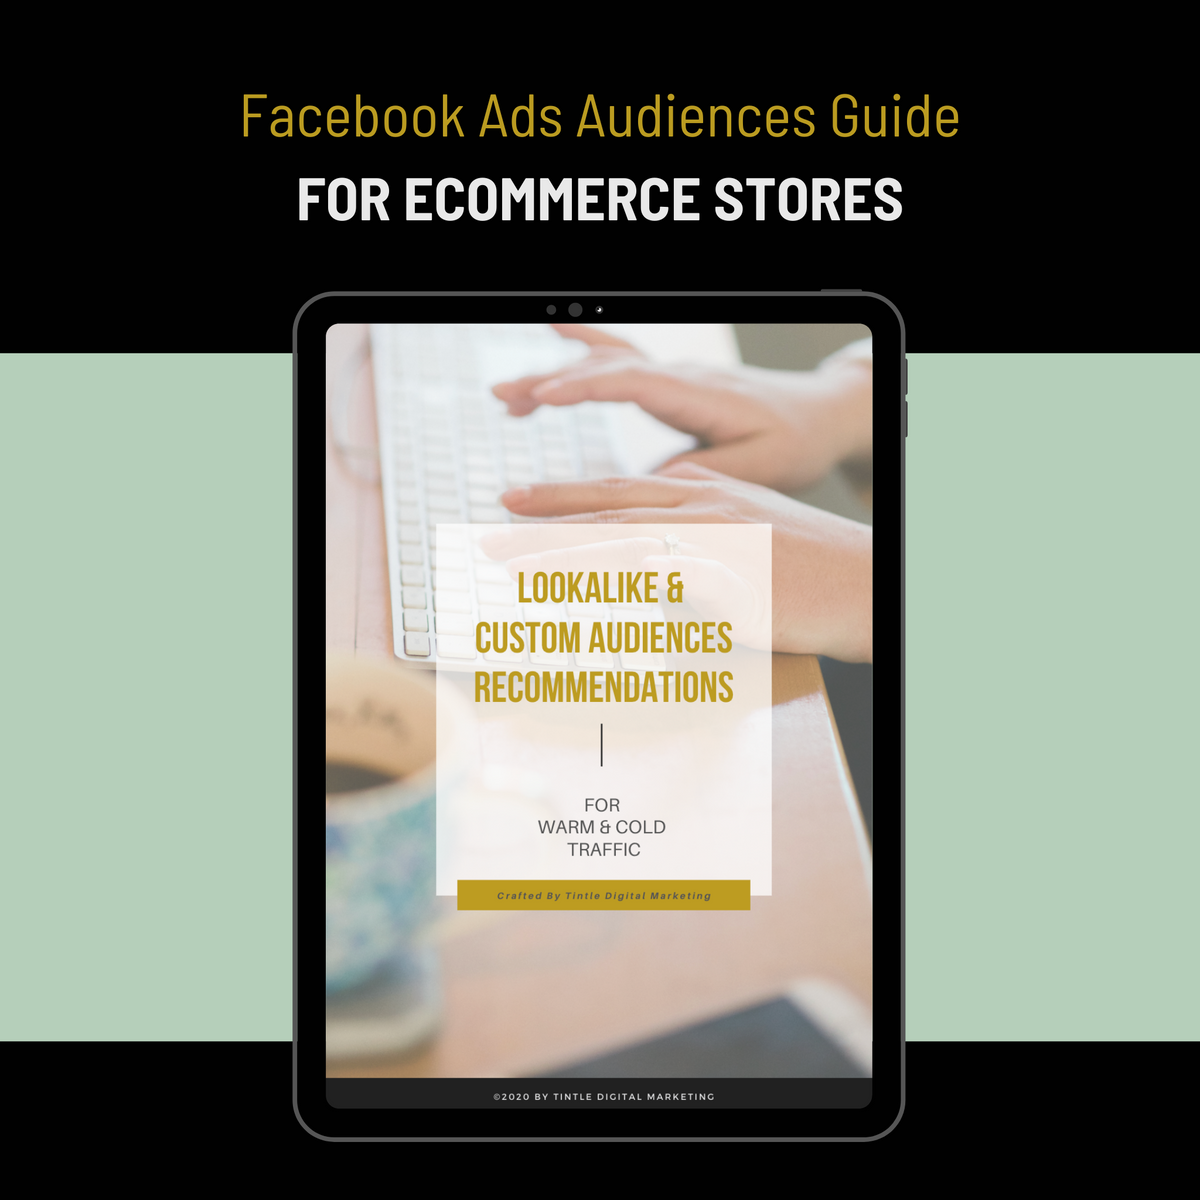 Audiences Guide For Ecommerce Facebook Ads